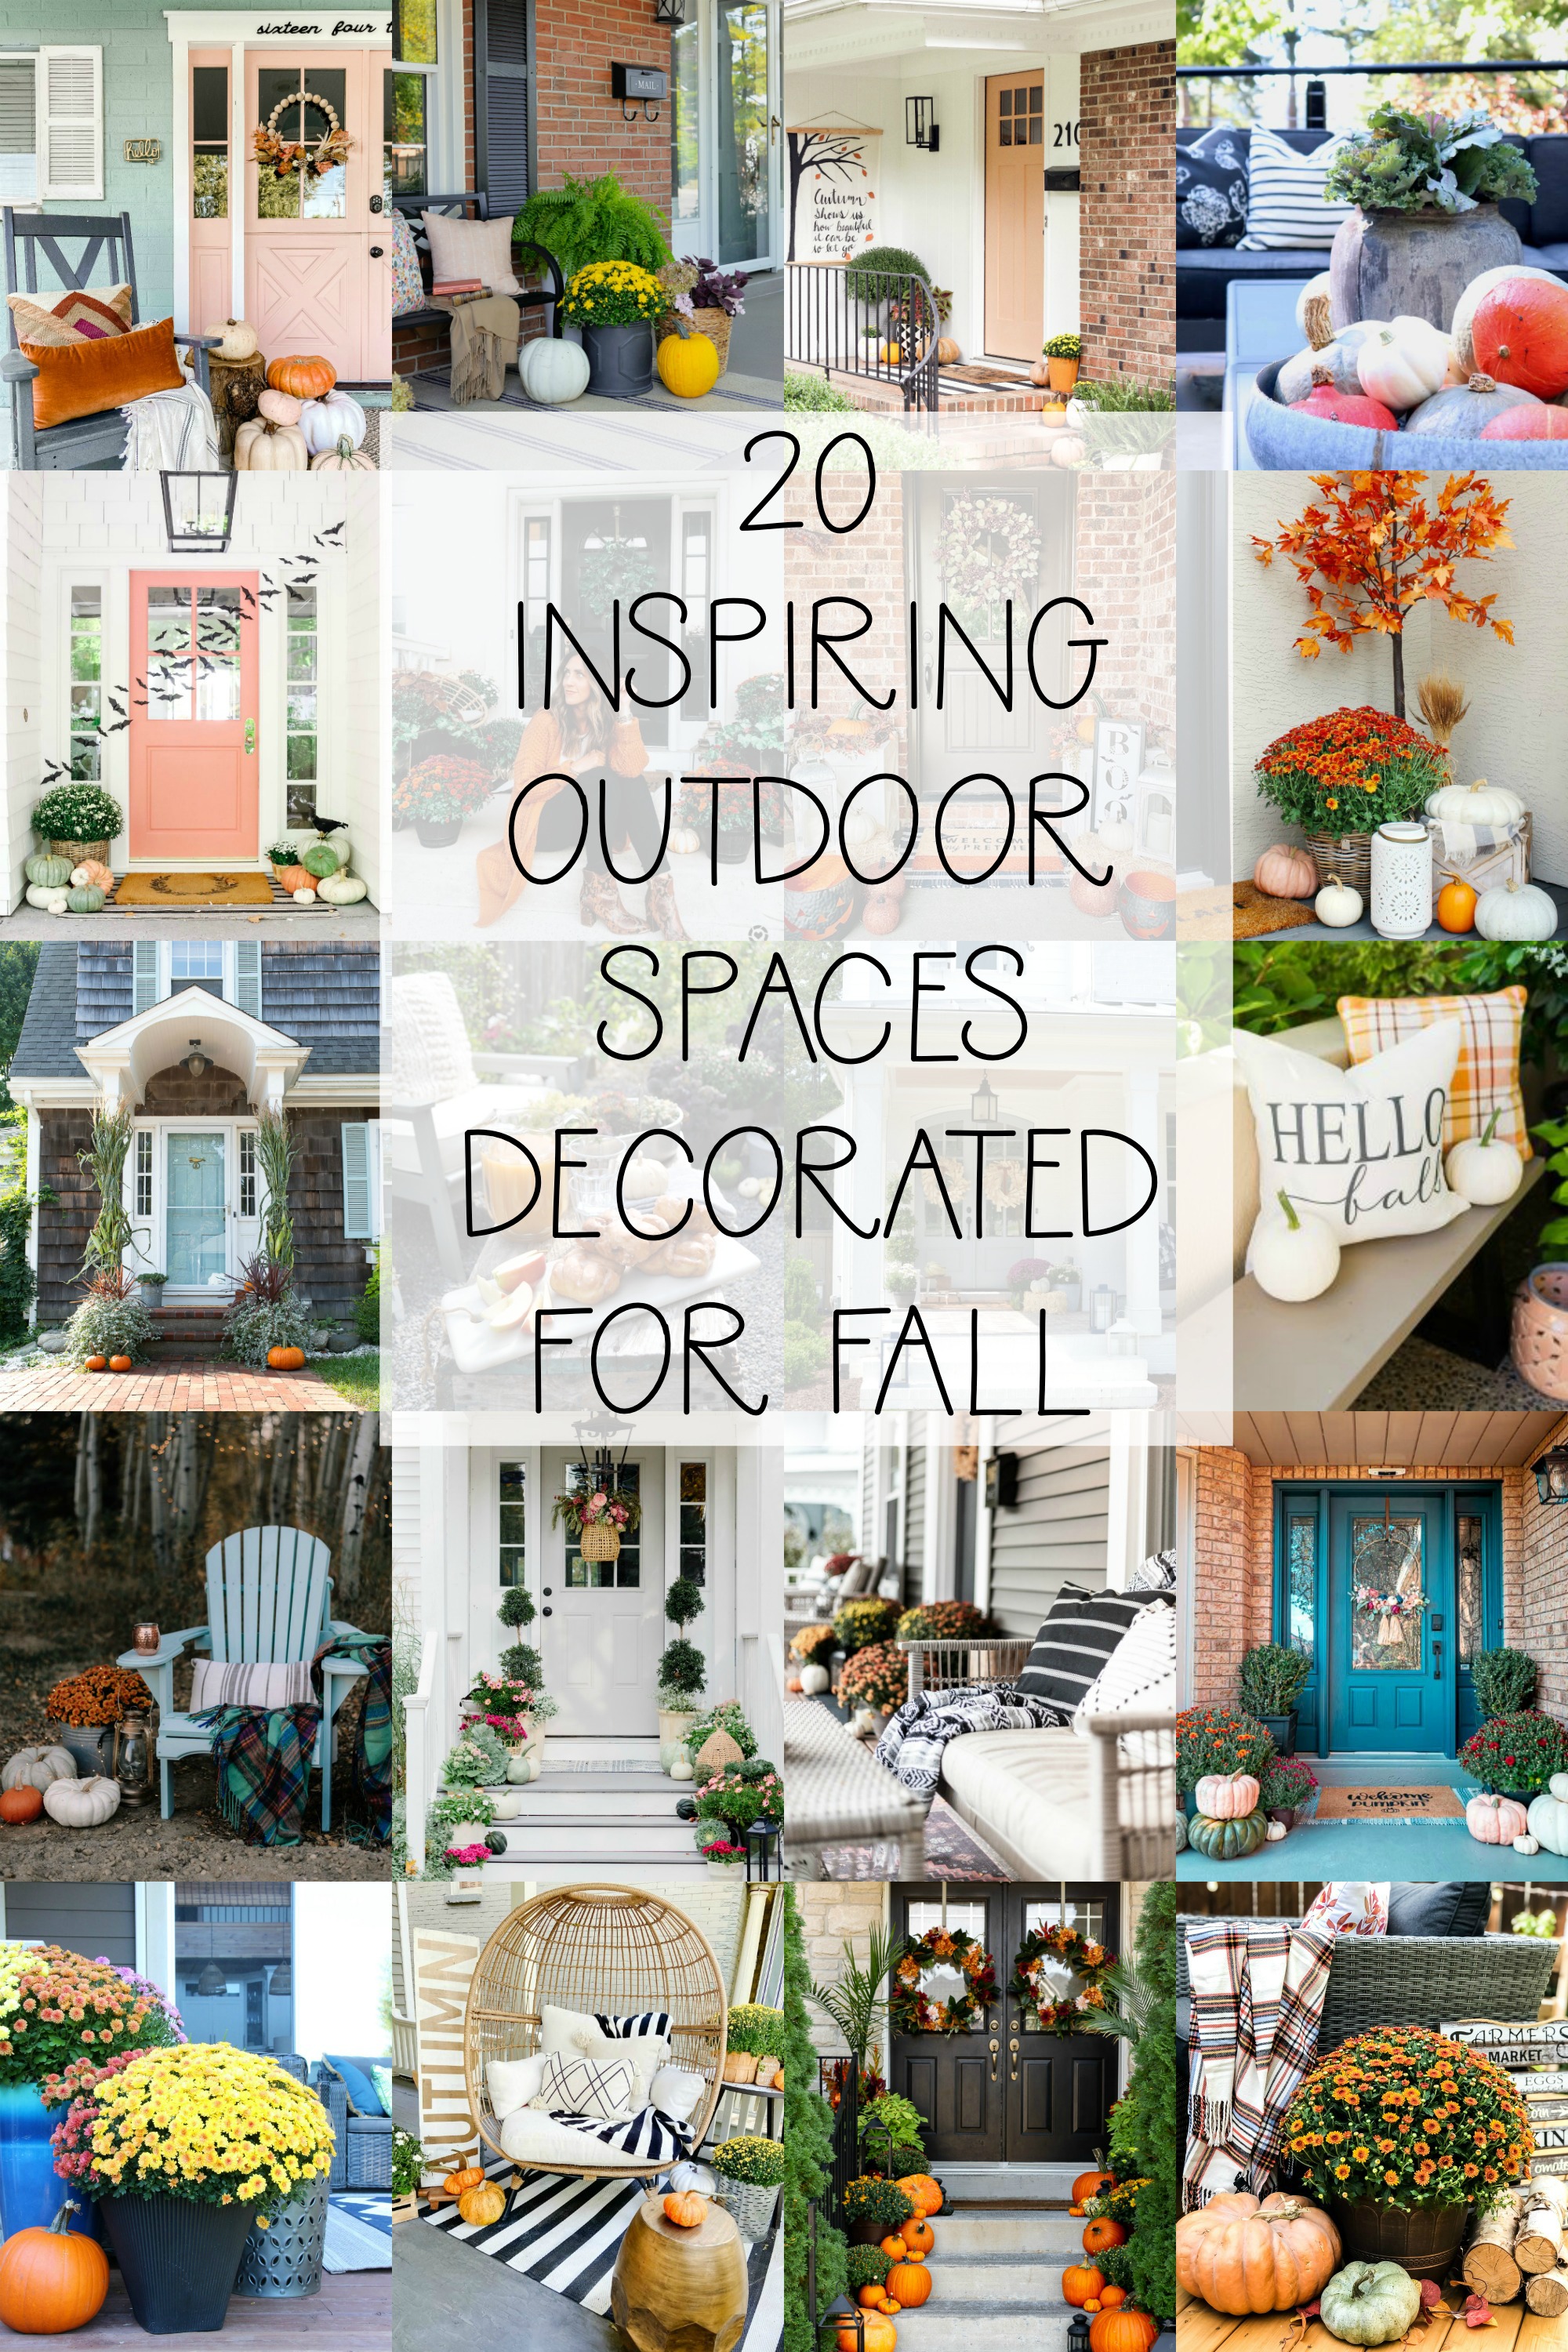 20 inspiring outdoor spaces decorated for fall.